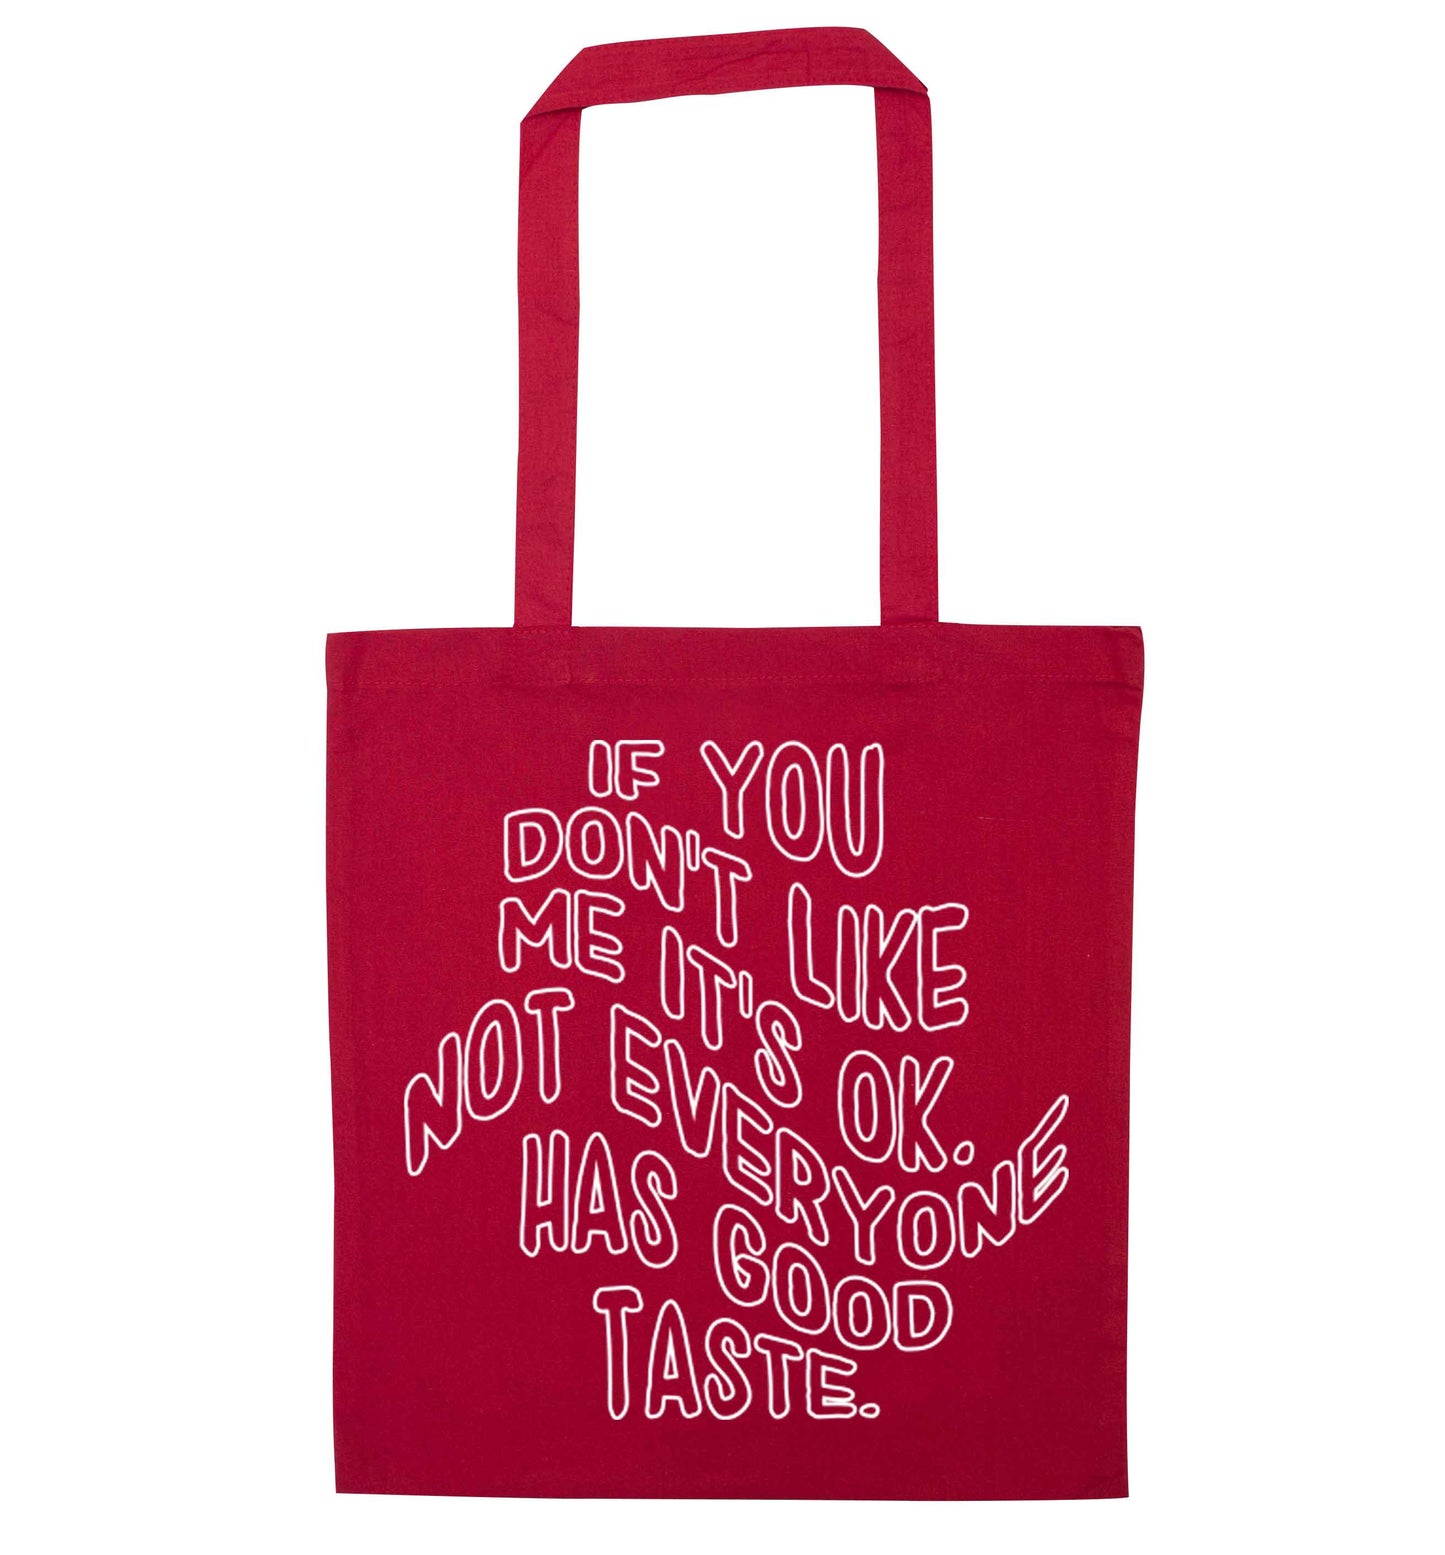 If you don't like me it's ok not everyone has good taste red tote bag